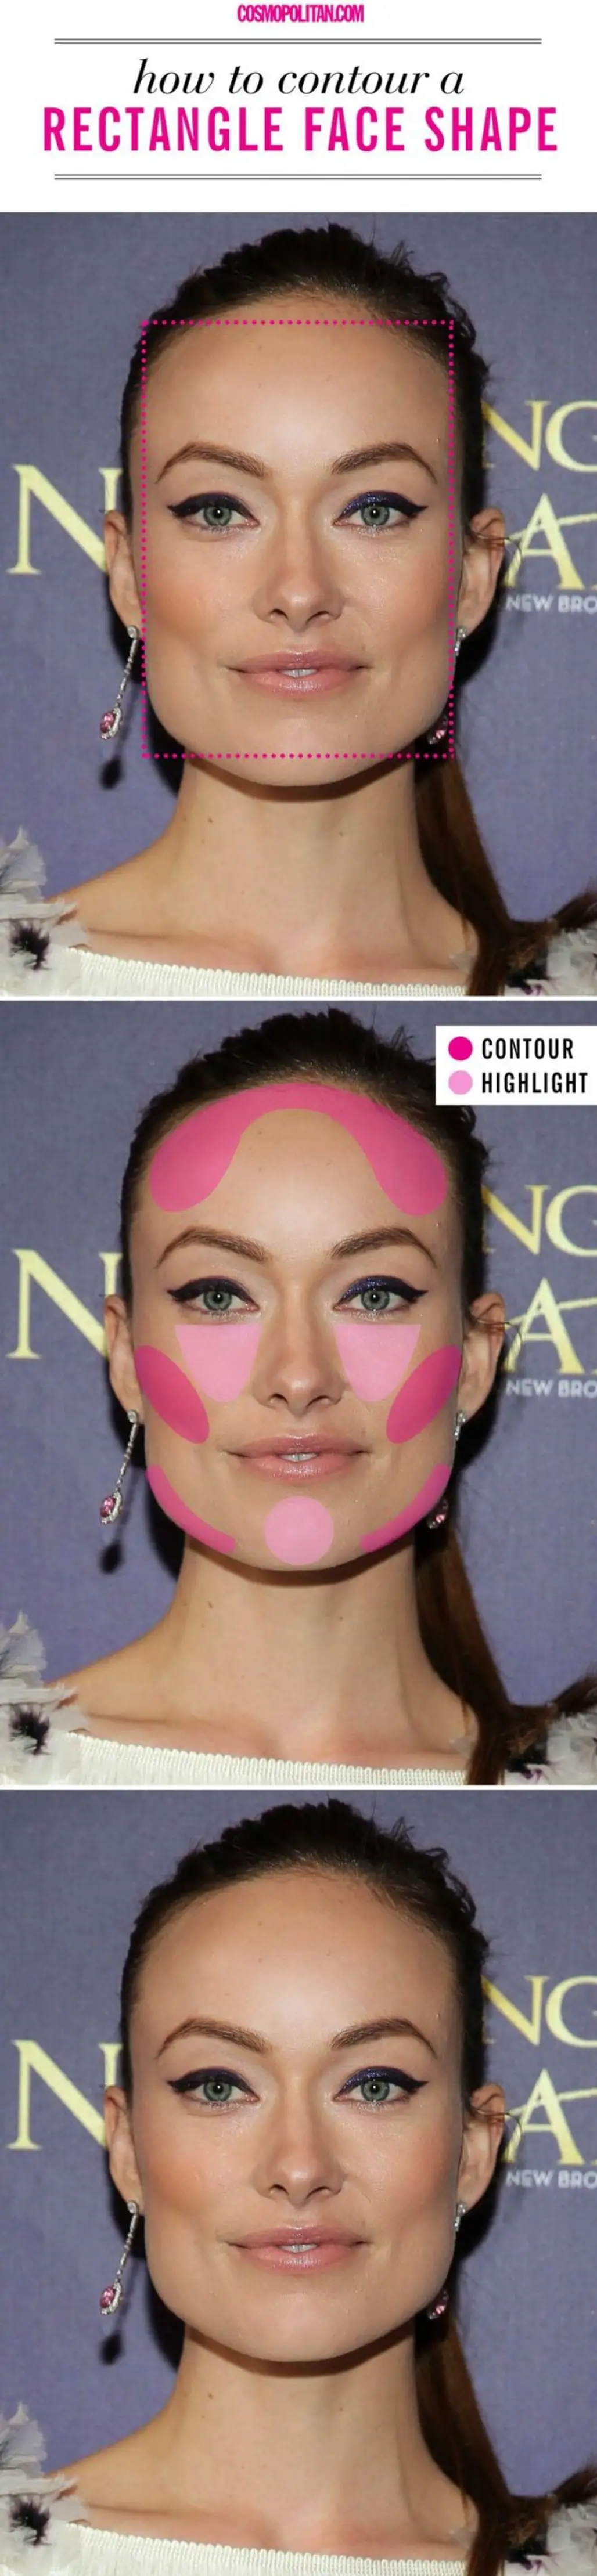 How to Contour if You Have a Rectangle Face Shape